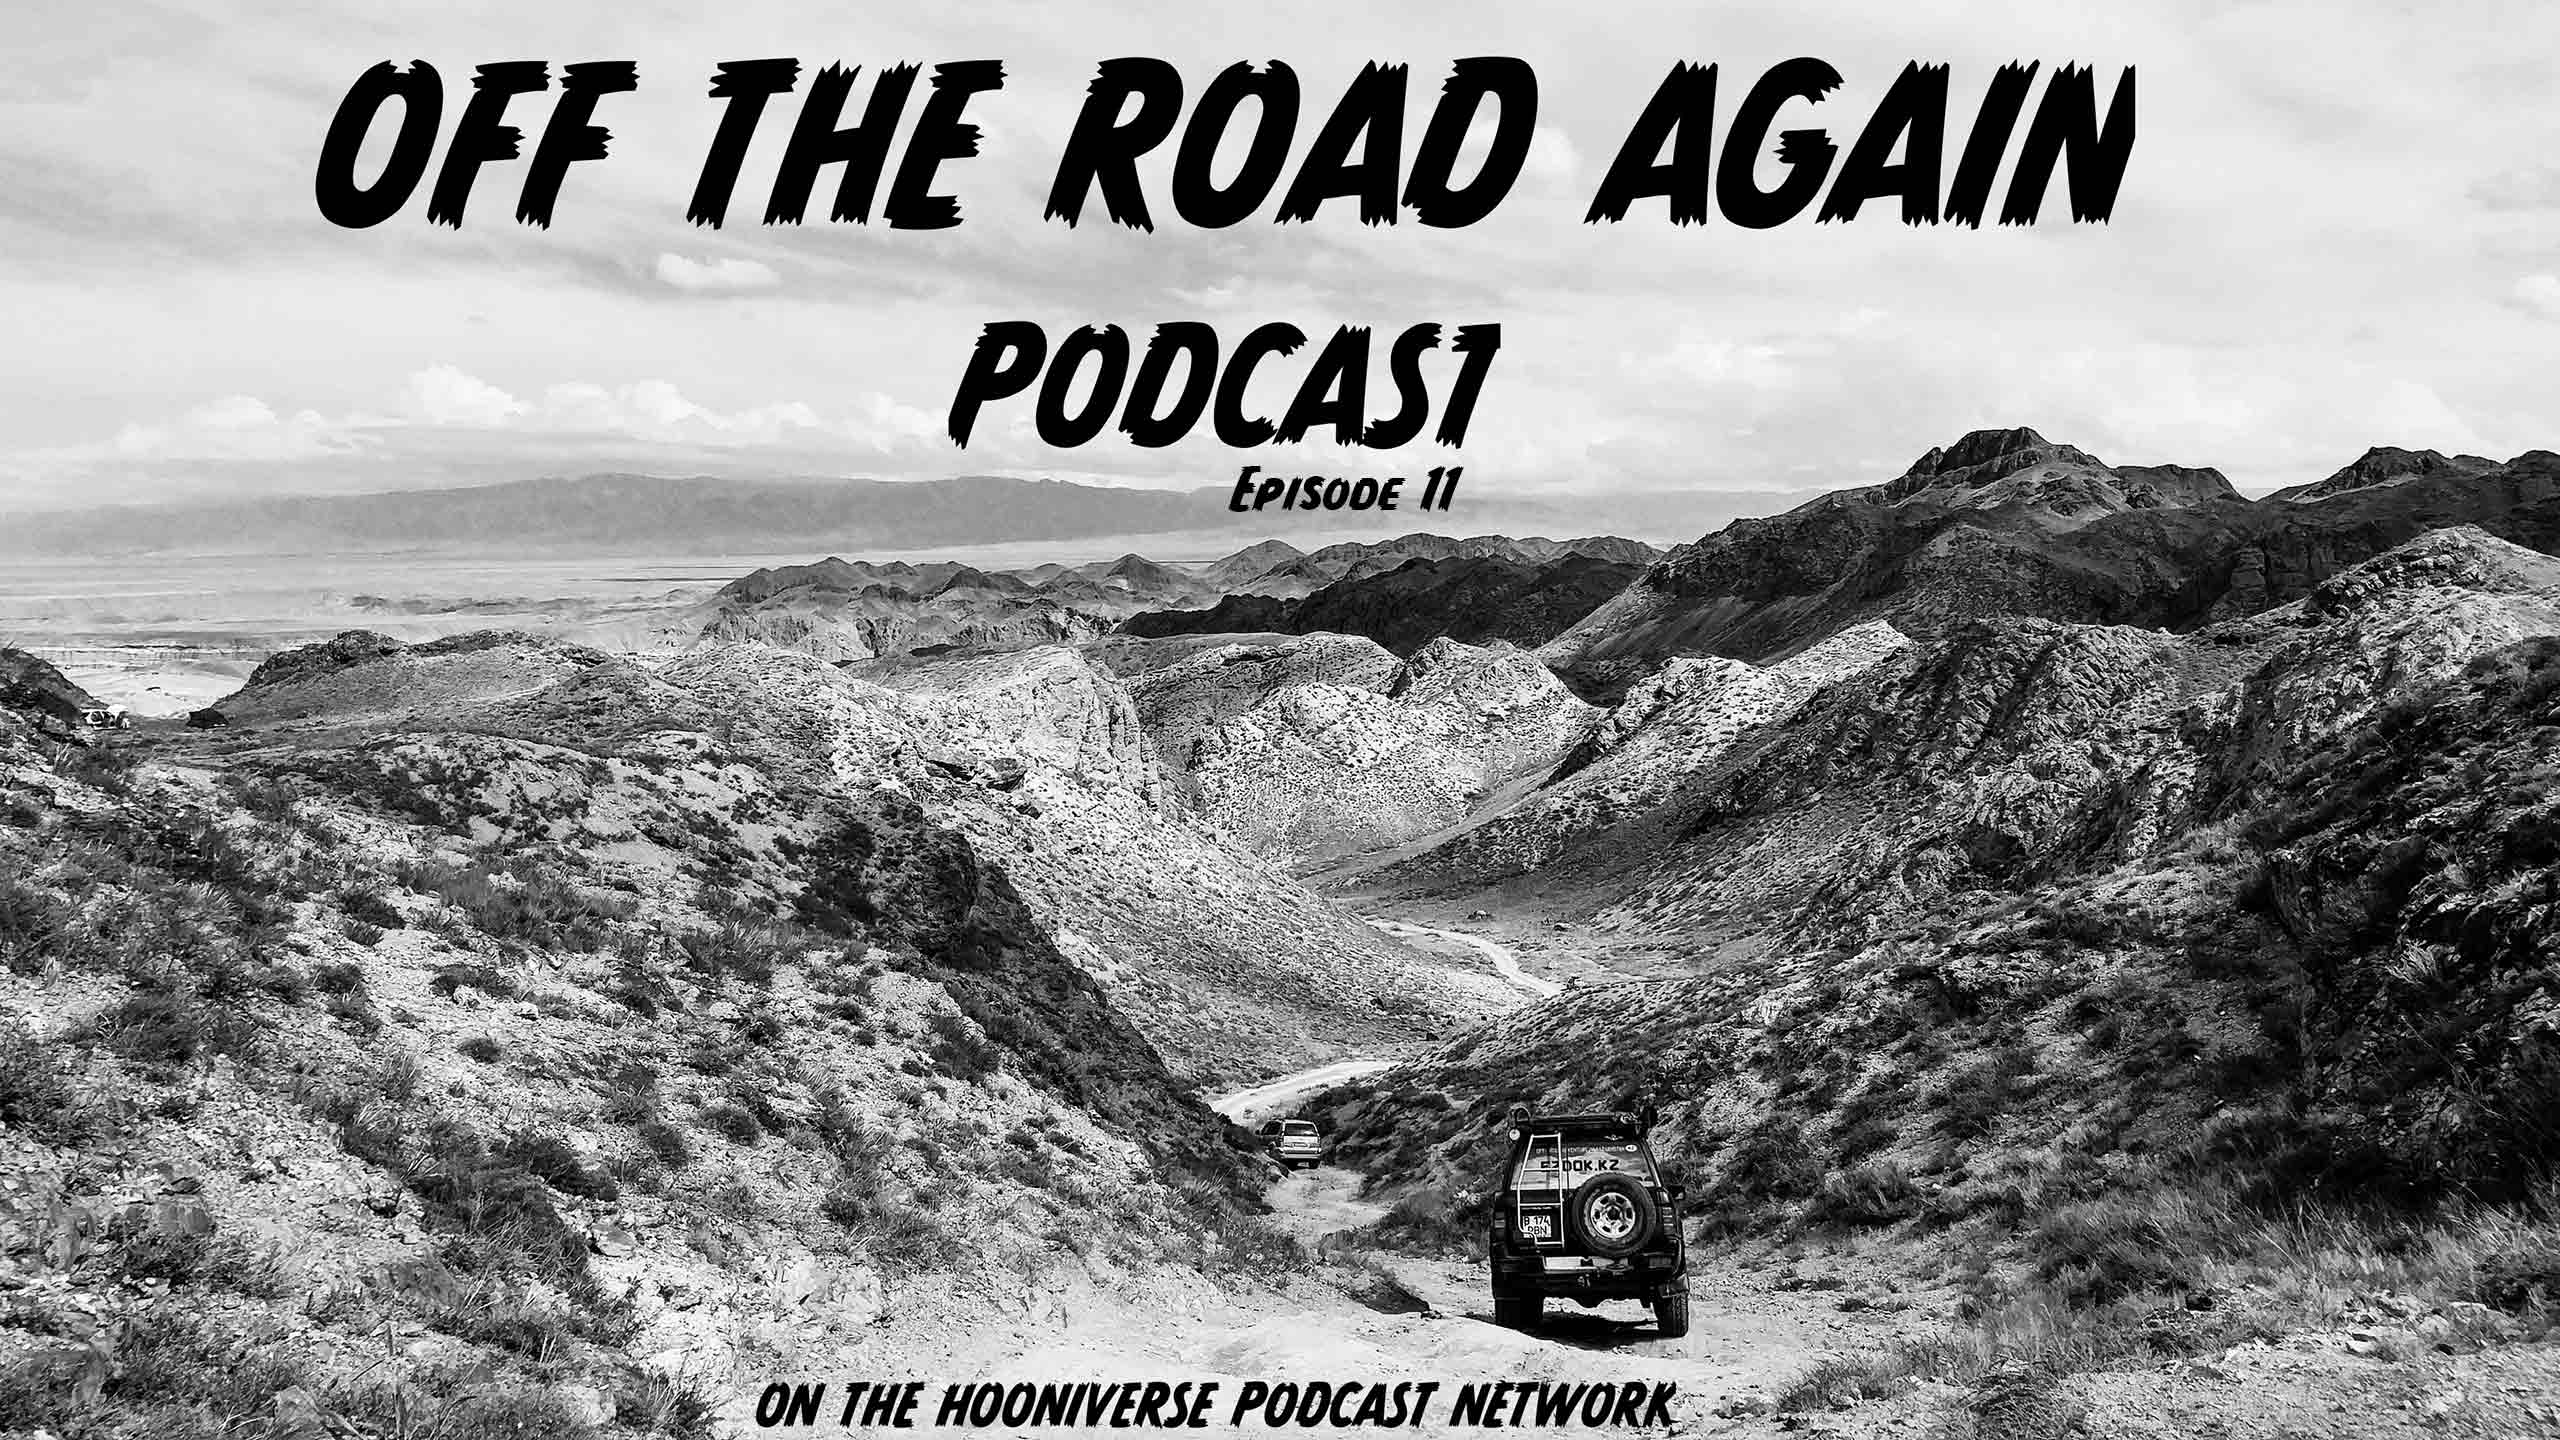 Off the Road Again Podcast - Episode 11